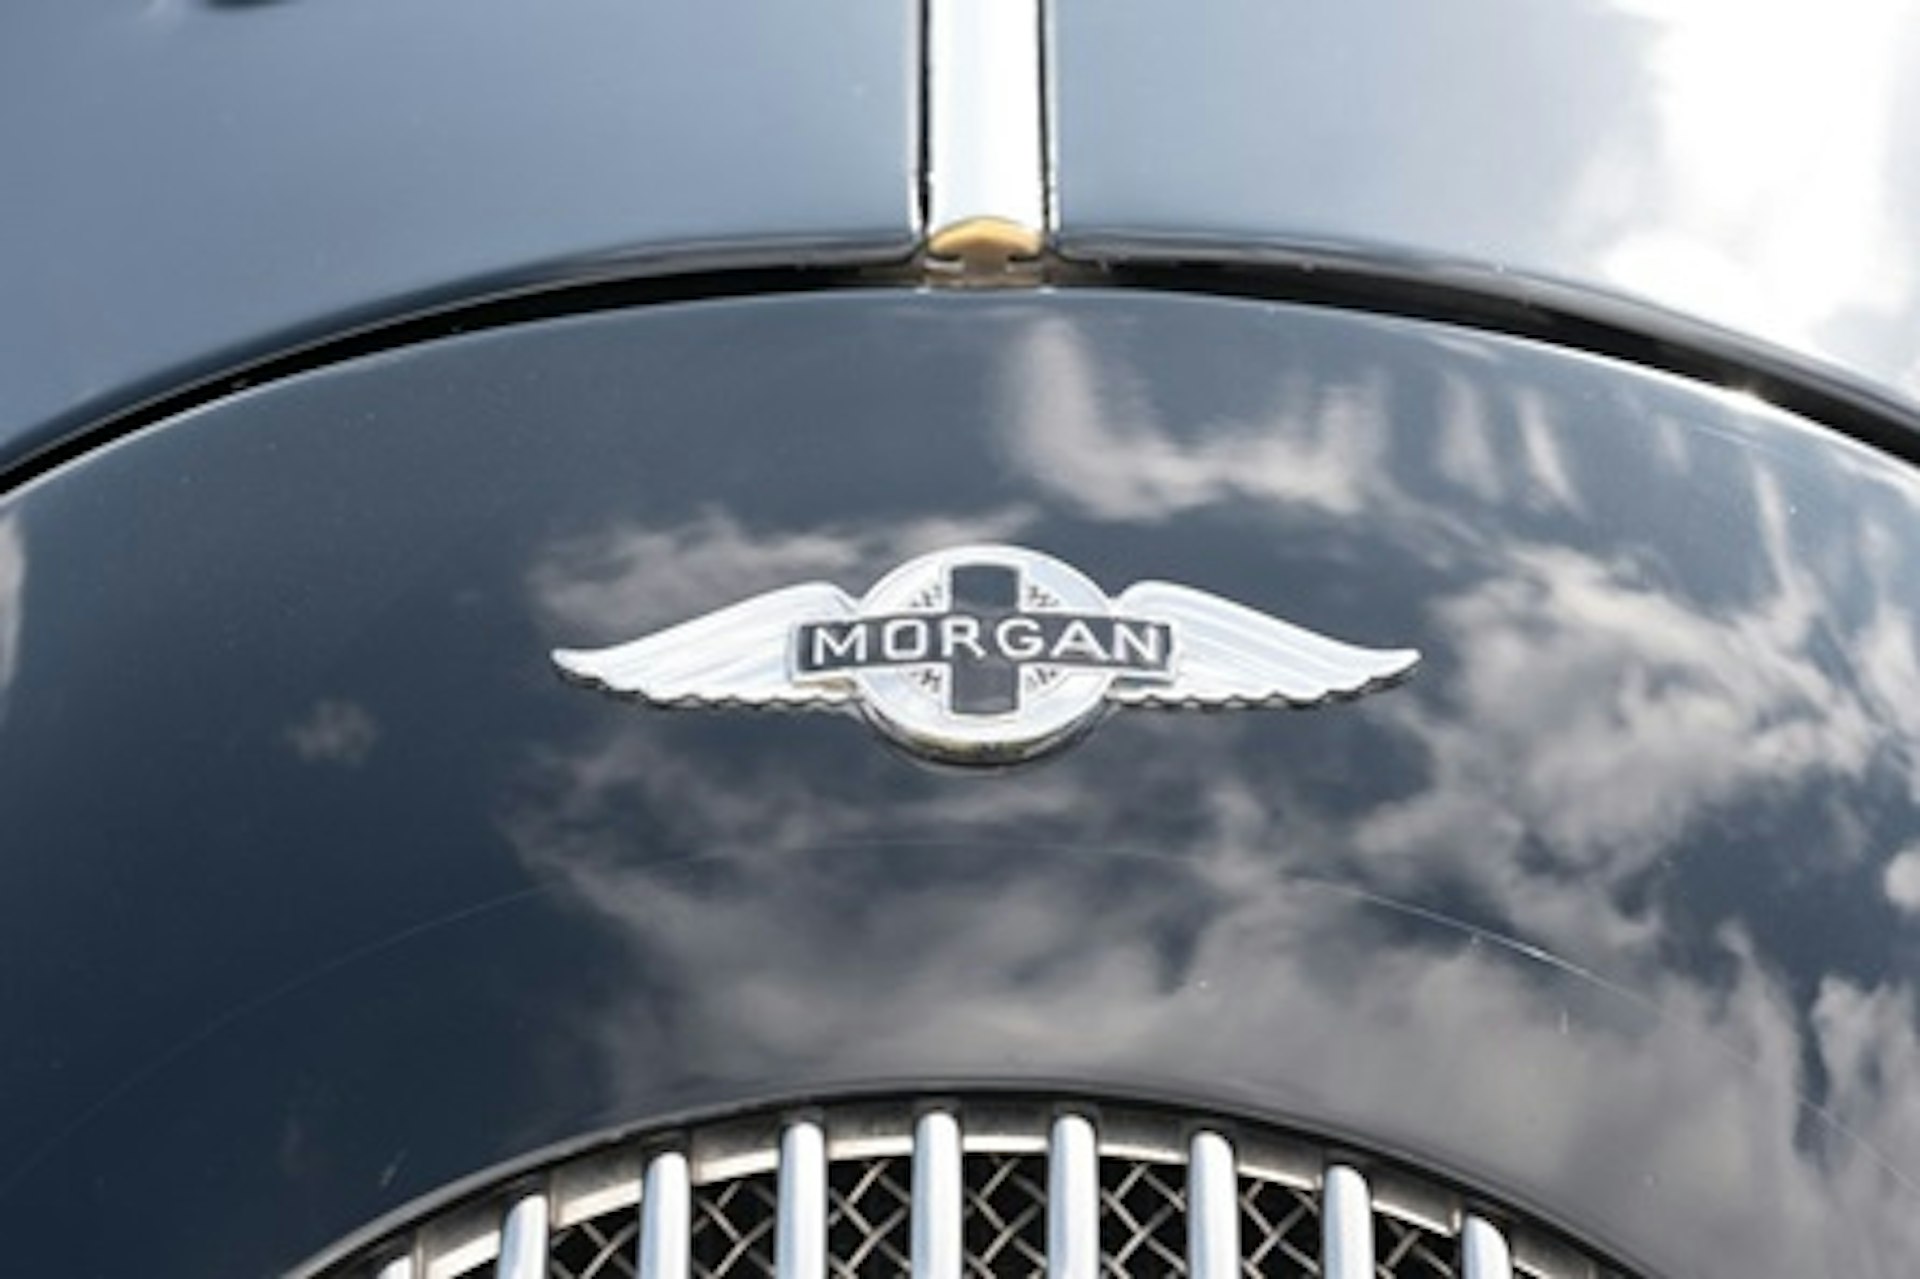 Morgan Roadster V6 Classic Car On Road Driving Experience - Weekday 4